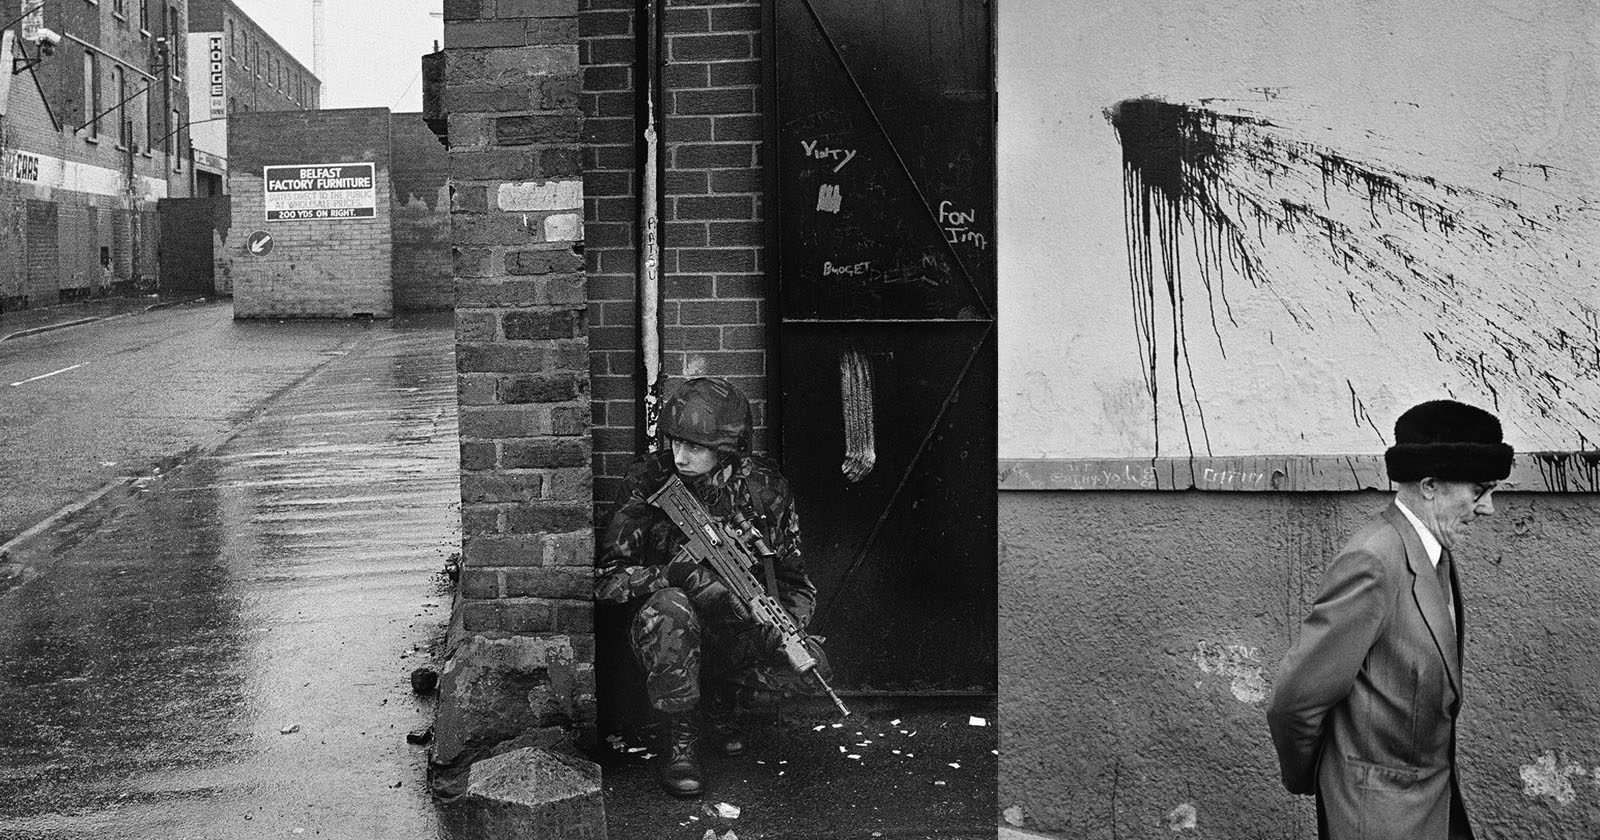 Gritty Black and White Photos Taken During the Northern Ireland Conflict | PetaPixel